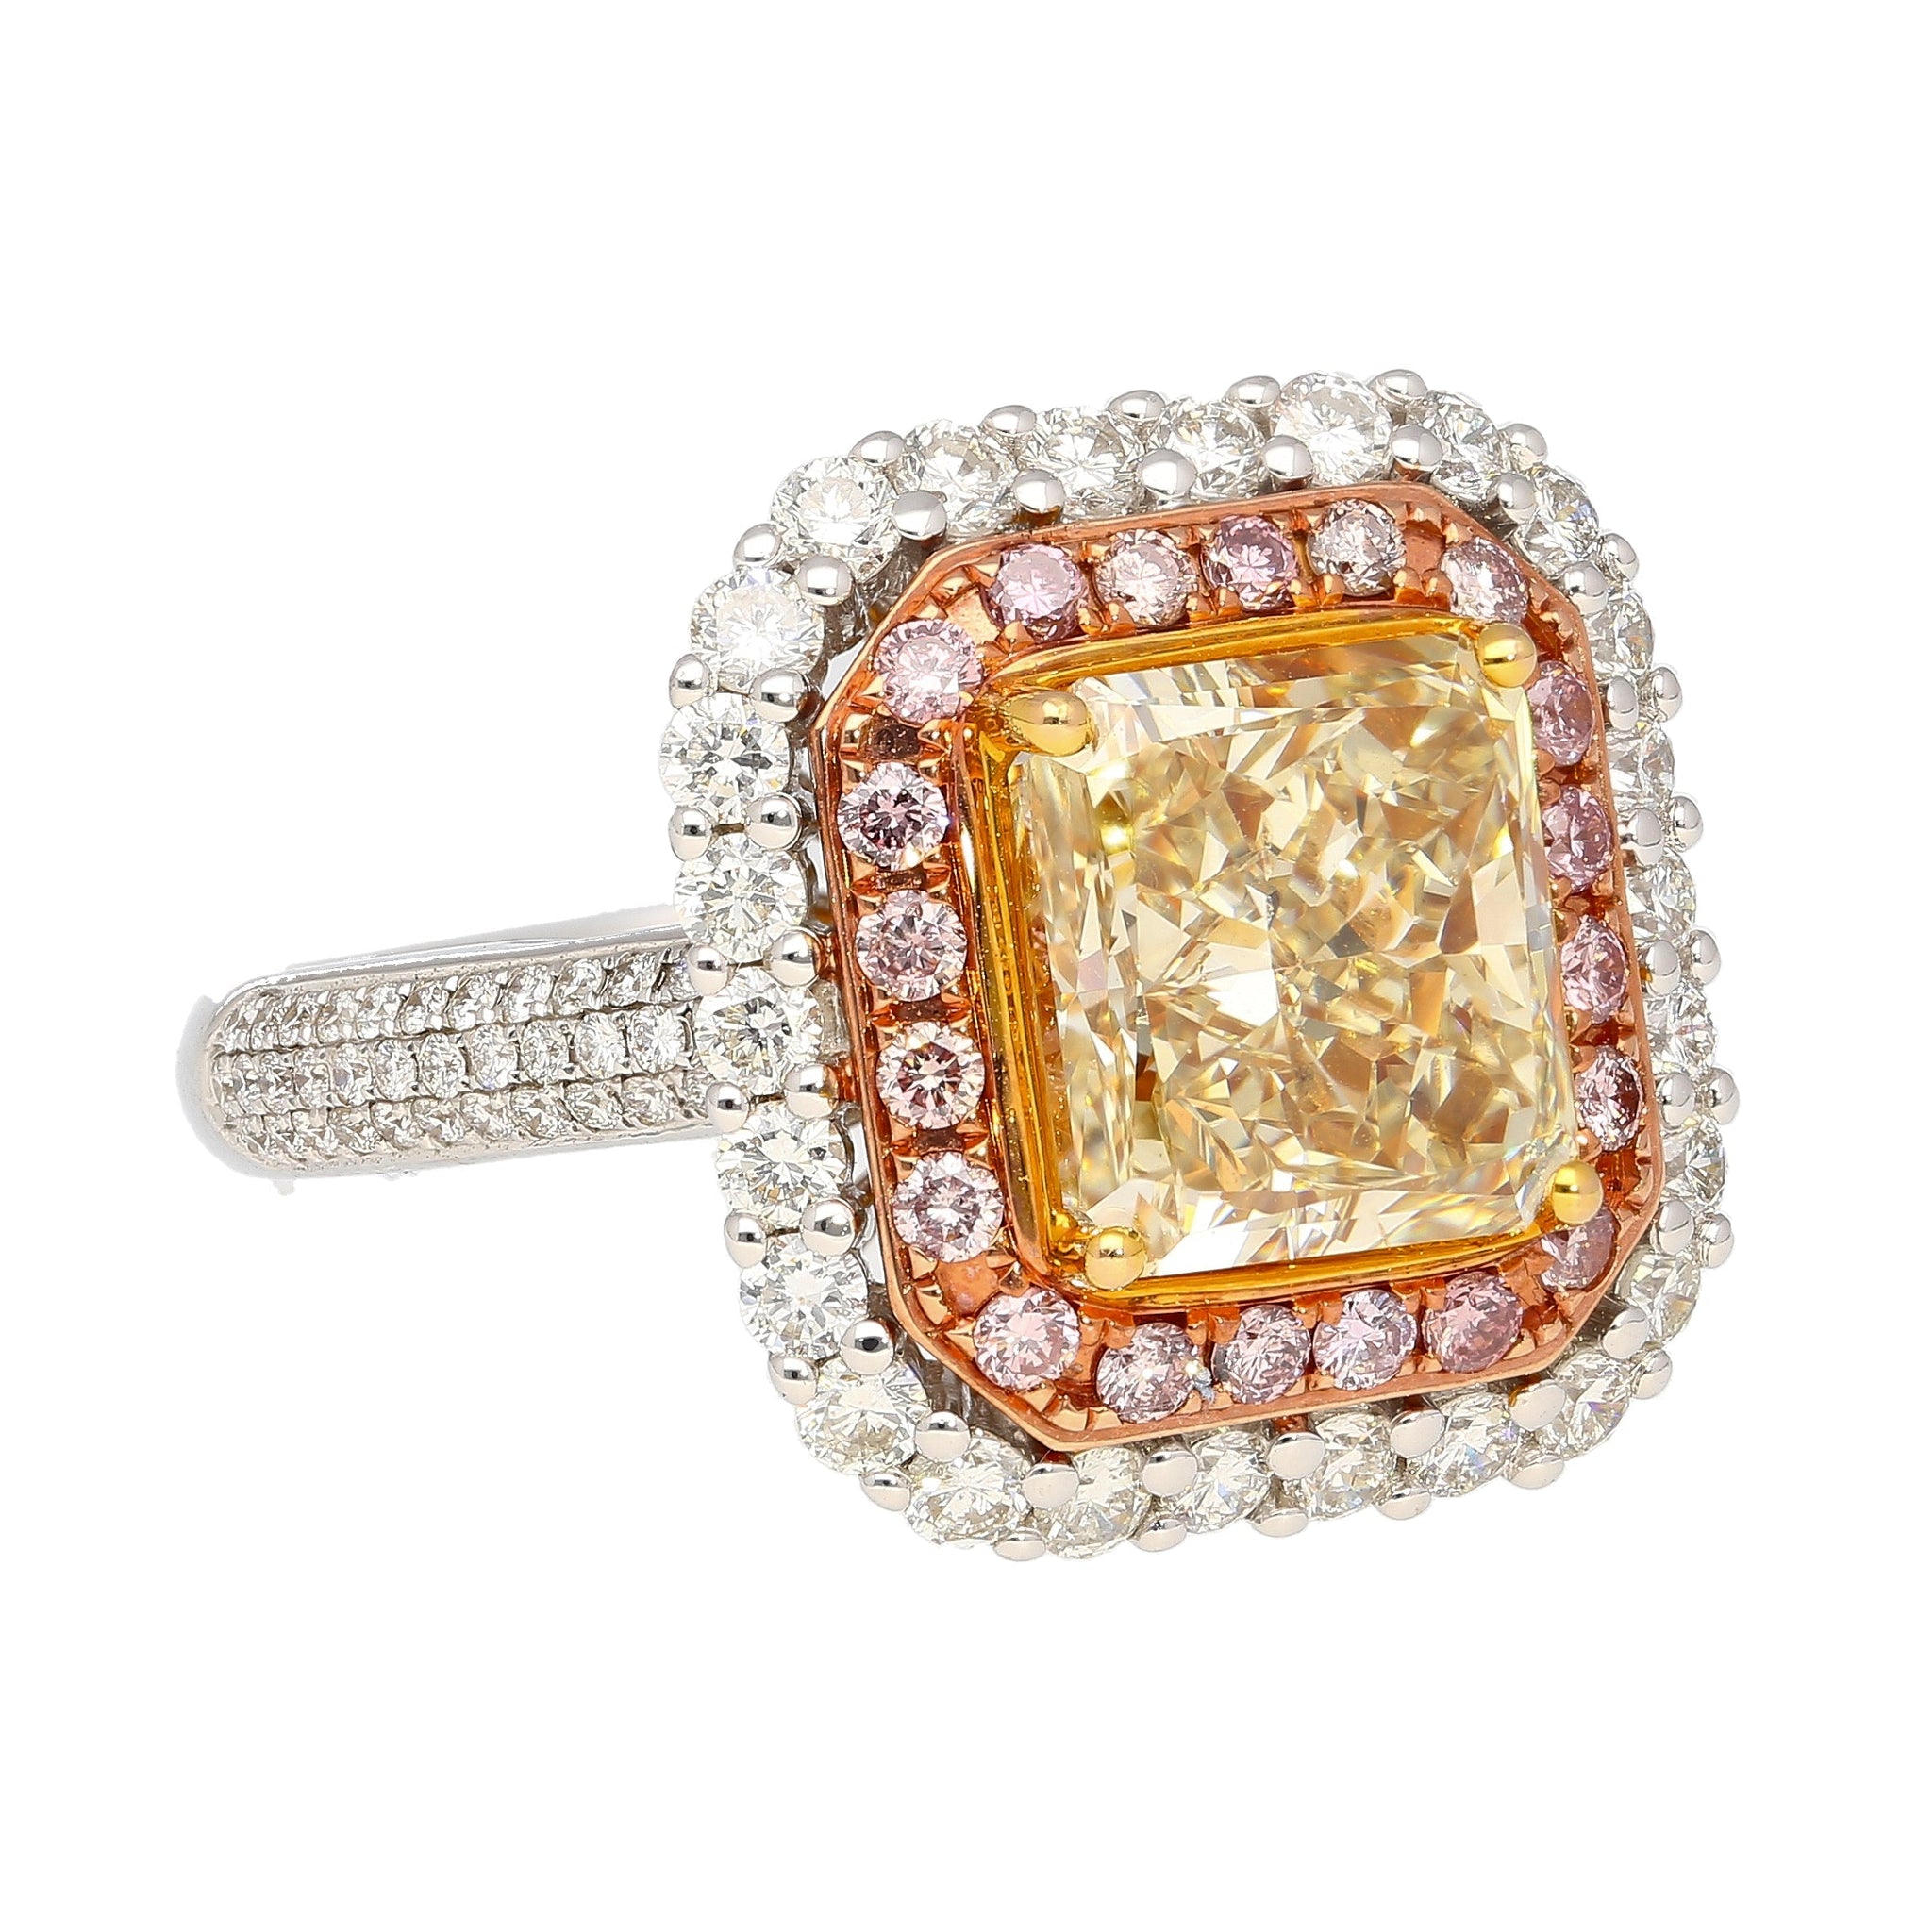 GIA Certified 3.51 Carat Fancy Brownish Yellow Diamond Ring with Pink and White Diamond Halo